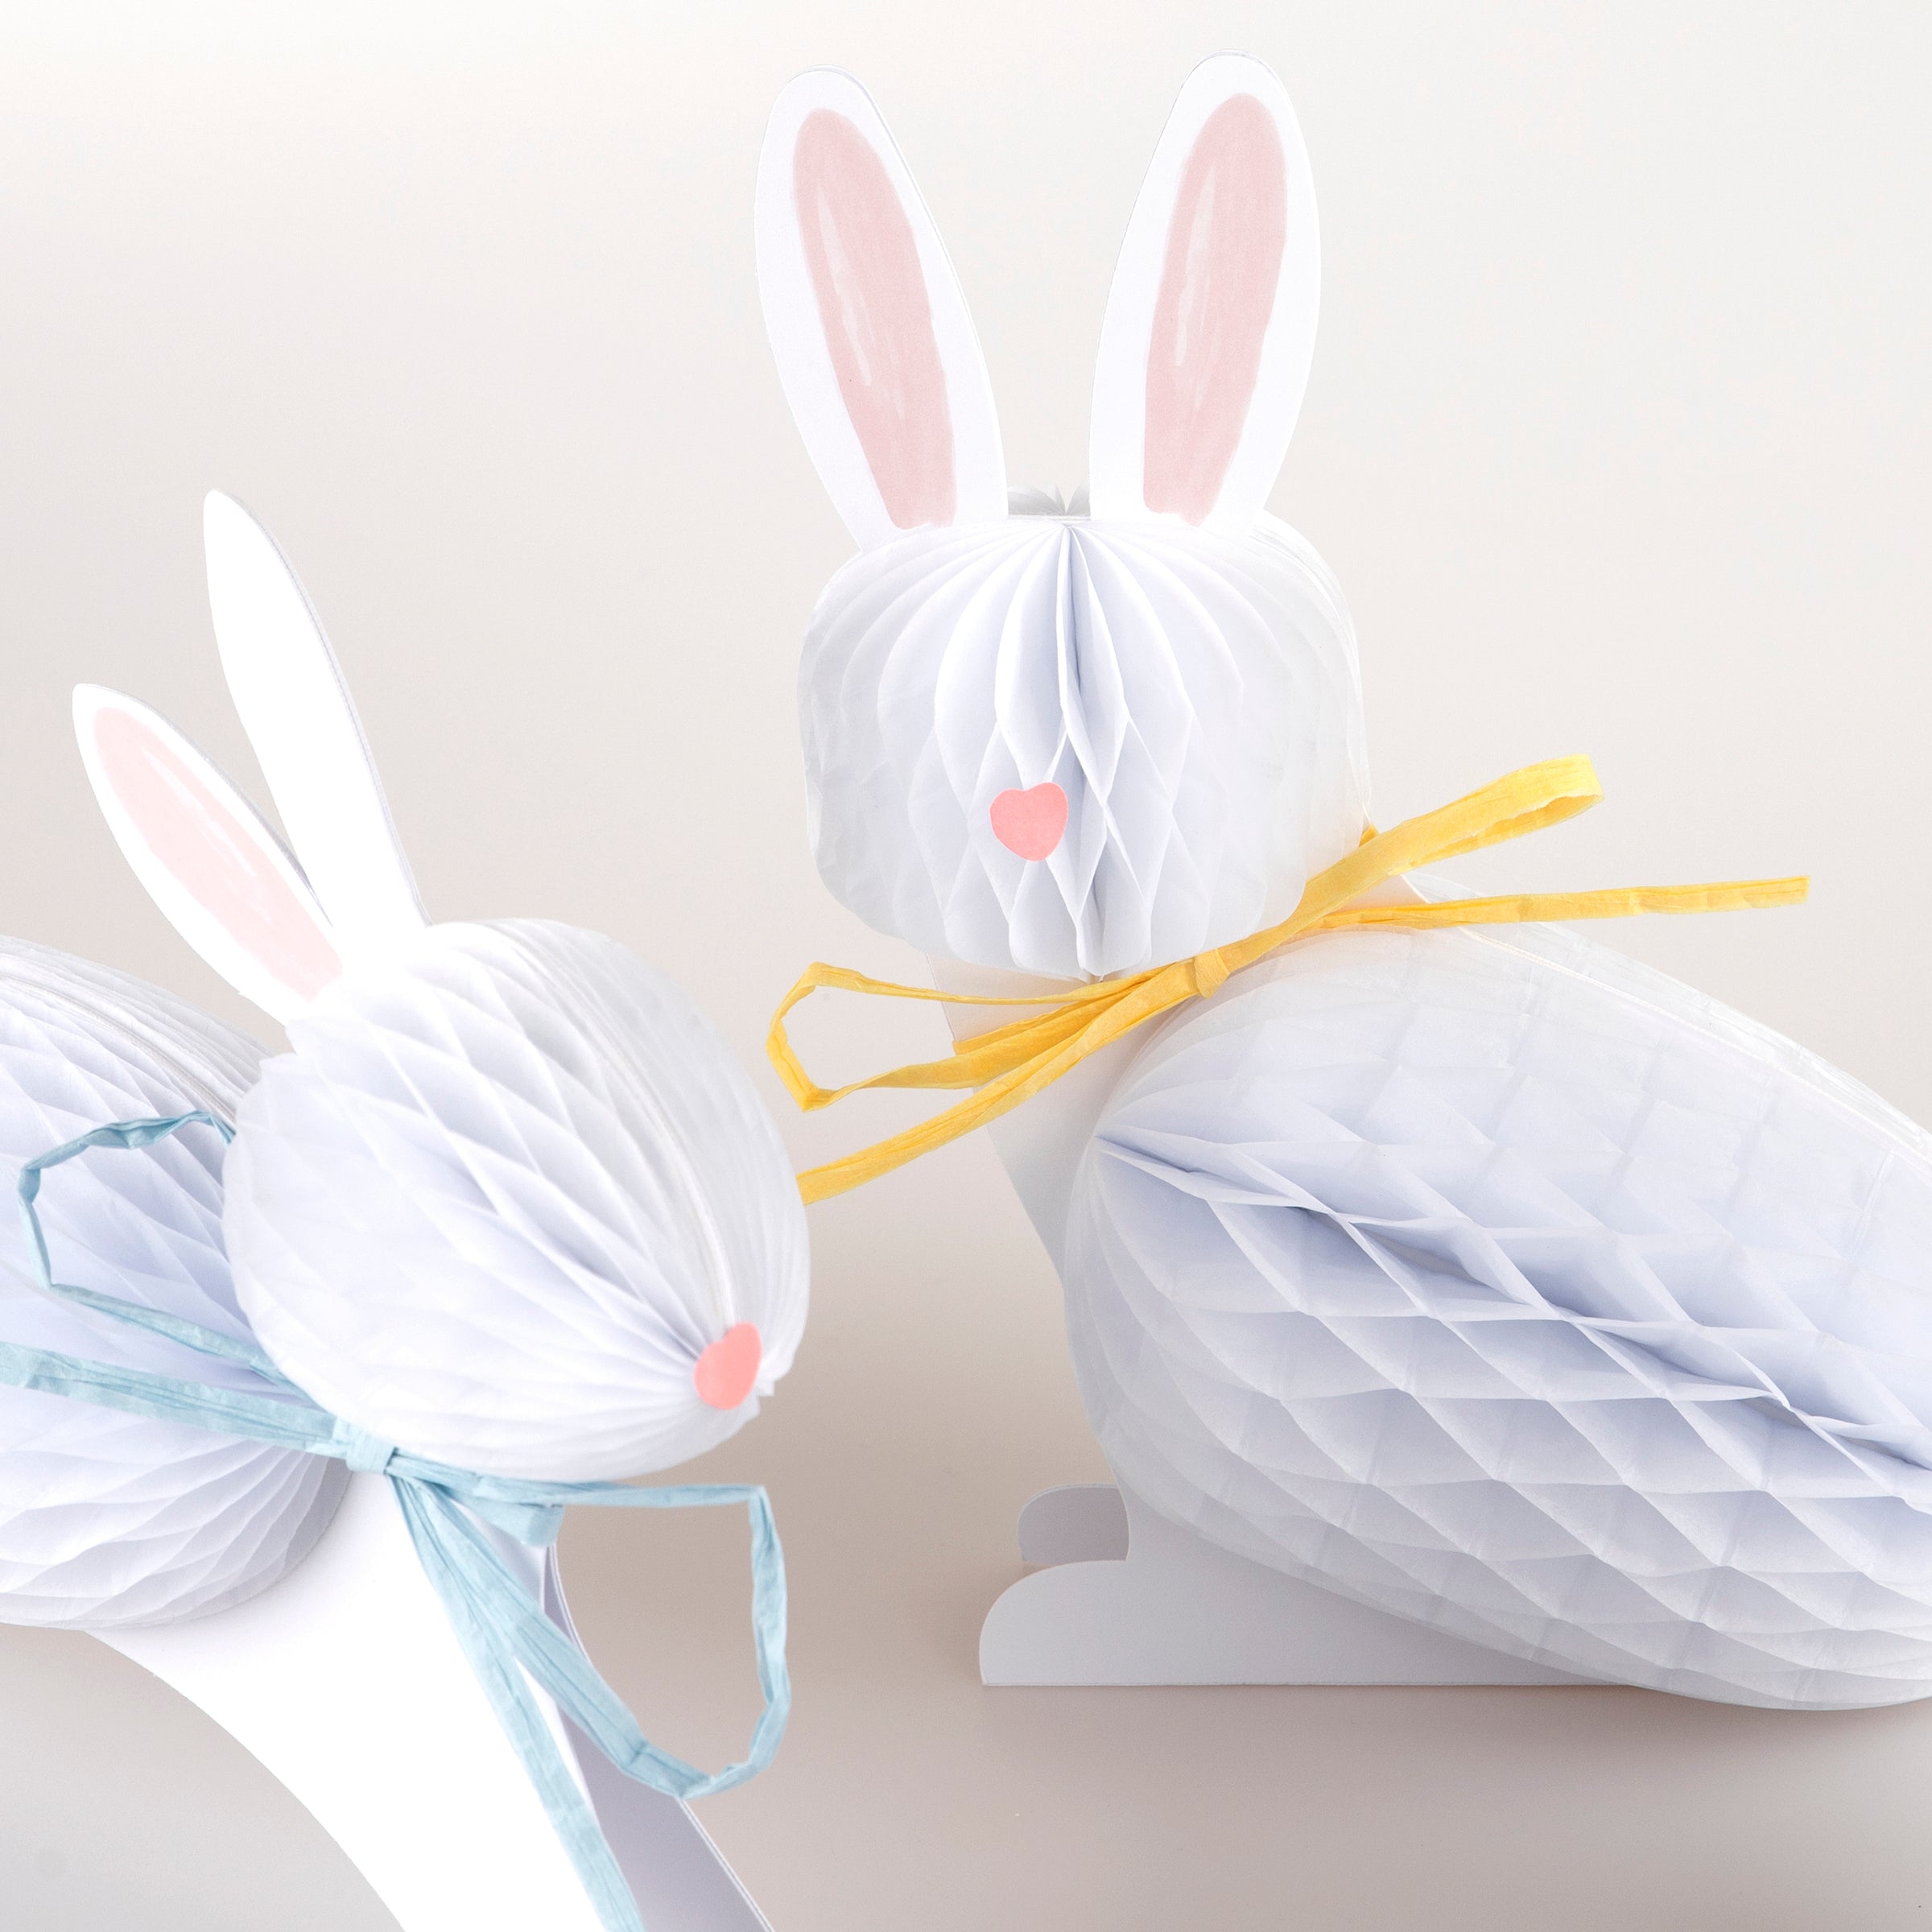 Our Easter bunny decorations, crafted with honeycomb paper and raffia ribbons, look amazing.